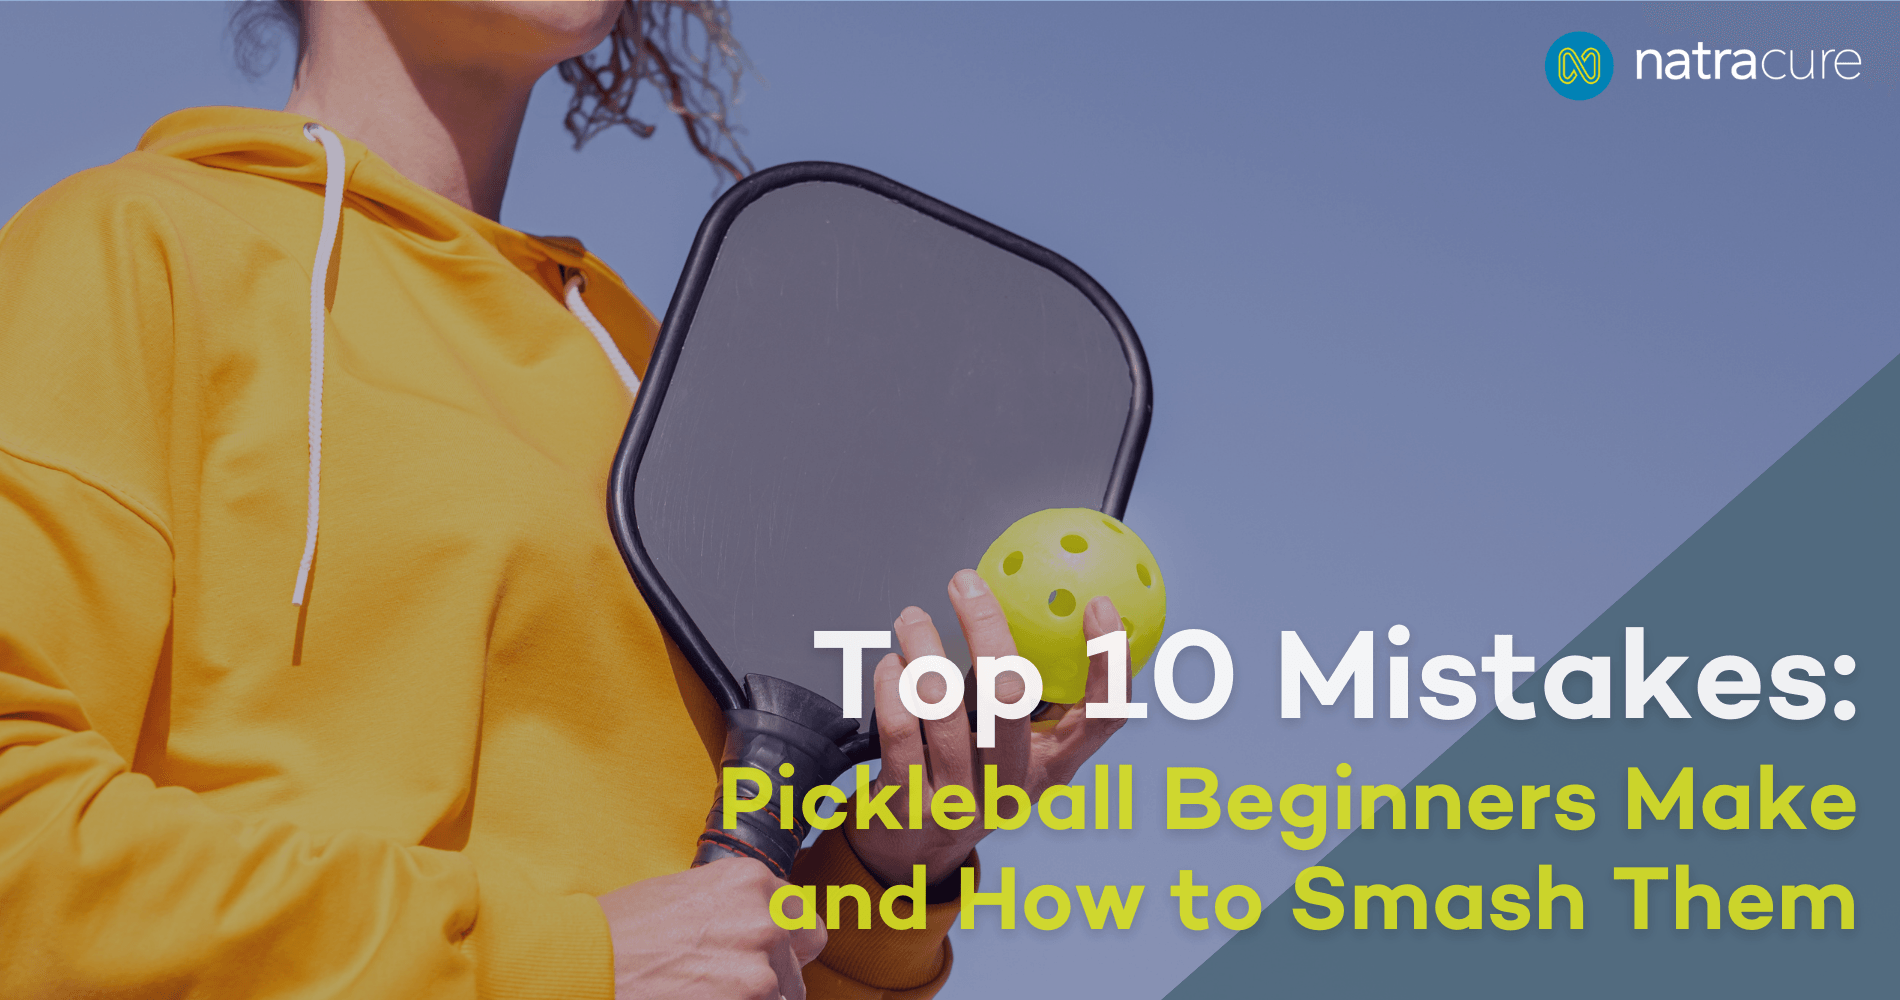 Top 10 Mistakes Pickleball Beginners Make and How to Smash Them | NatraCure